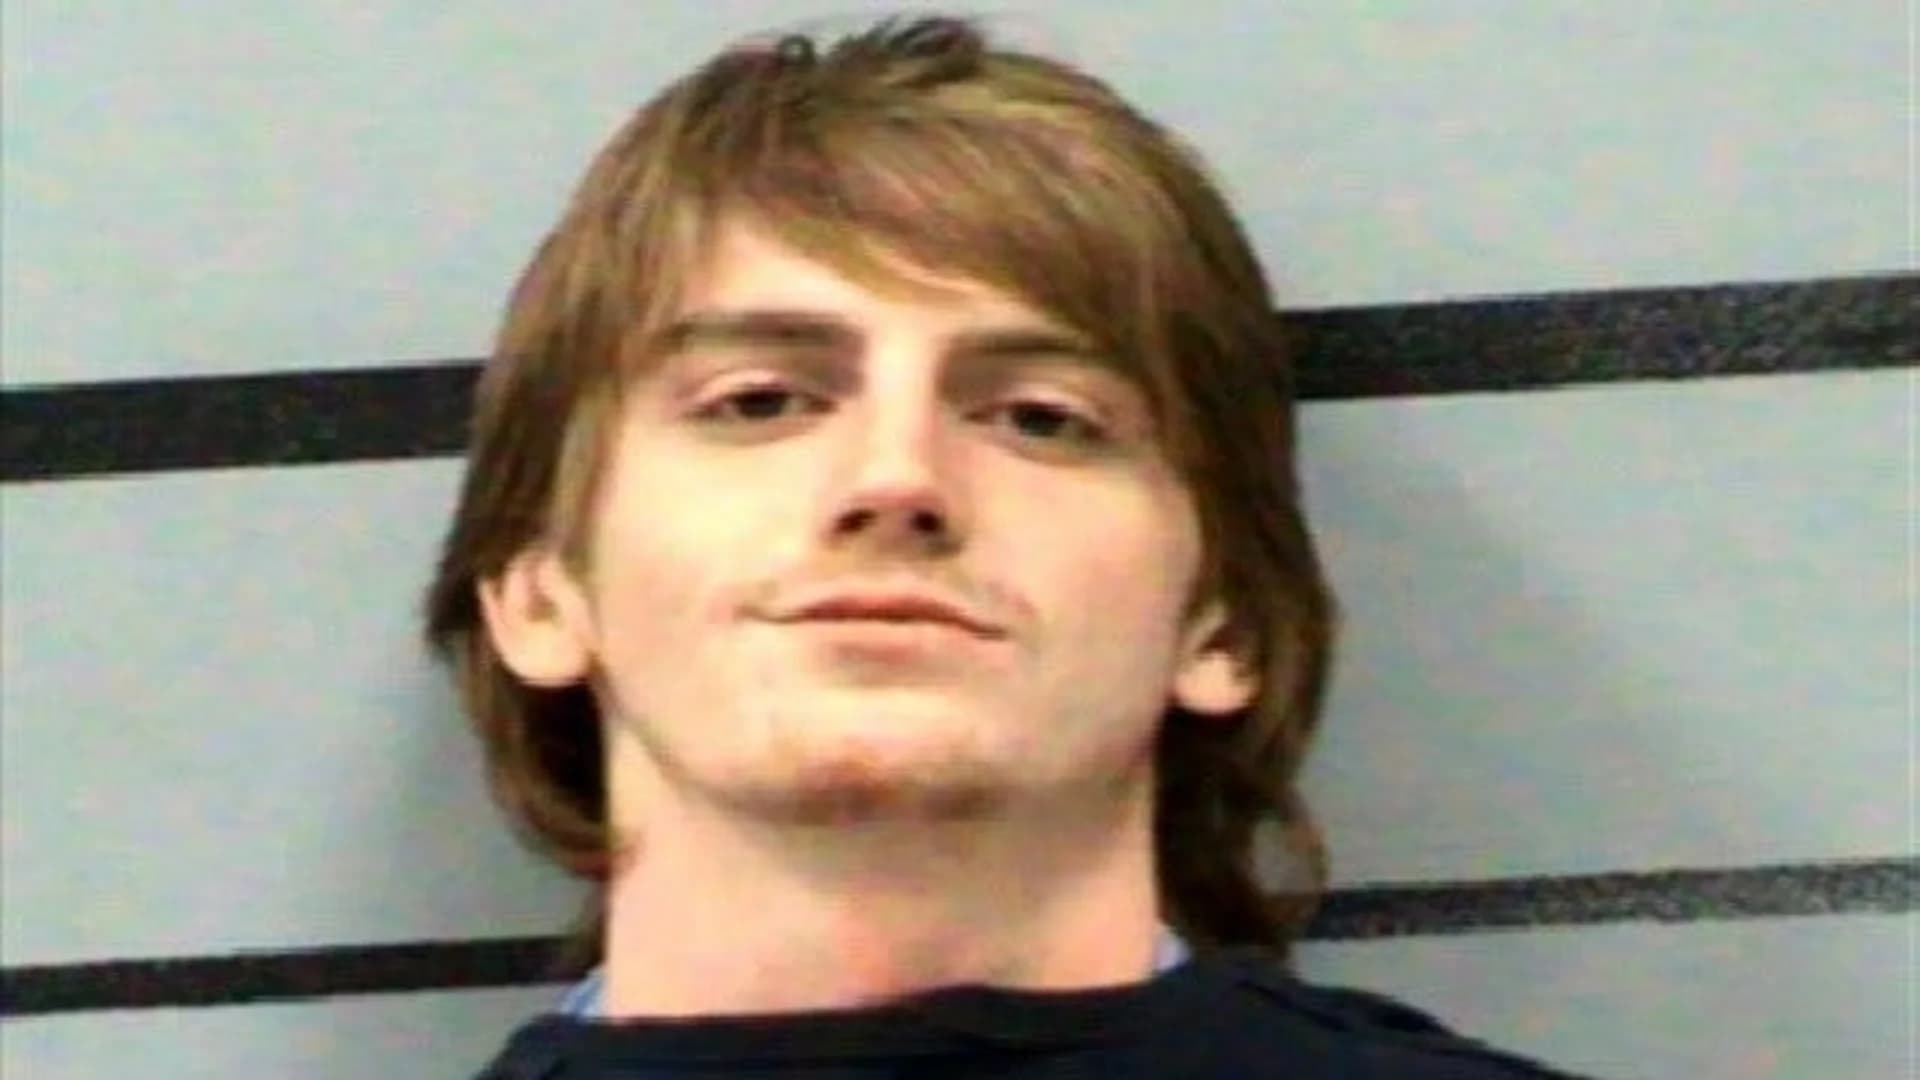 Texas student charged with murder in campus officer’s death